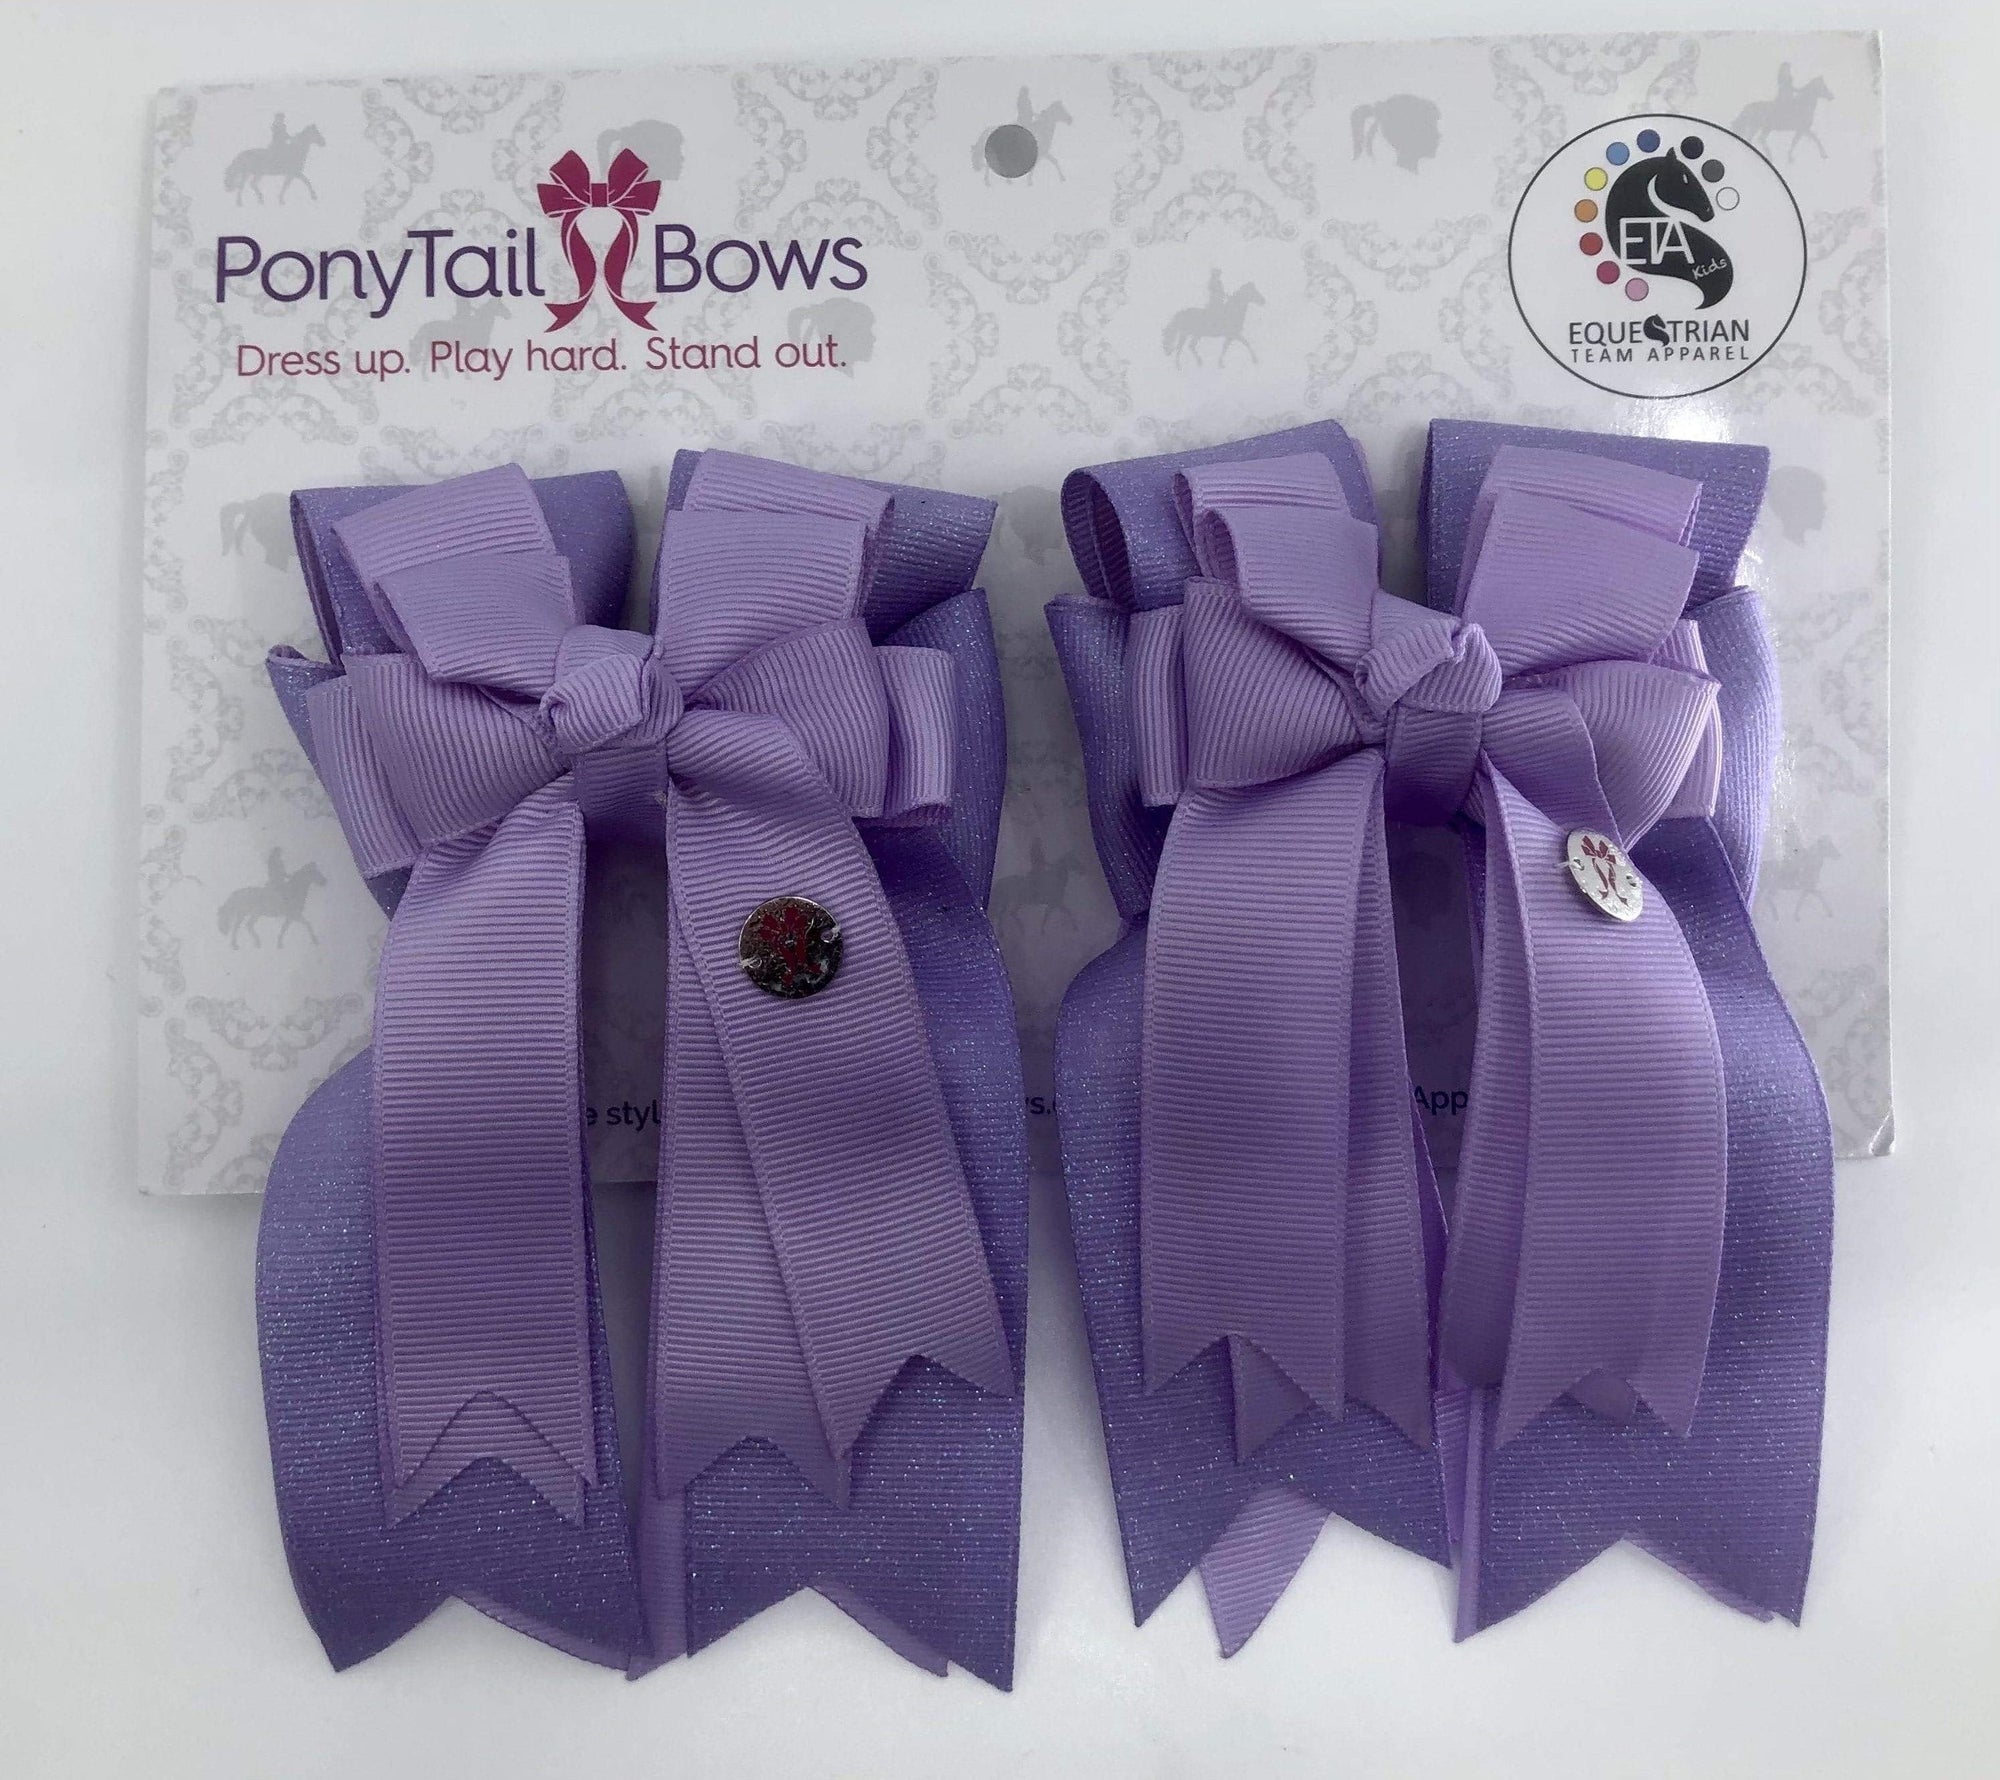 PonyTail Bows 3" Tails Lavender PonyTail Bows equestrian team apparel online tack store mobile tack store custom farm apparel custom show stable clothing equestrian lifestyle horse show clothing riding clothes Abbie Horse Show Bows | PonyTail Bows | Equestrian Hair Accessories horses equestrian tack store